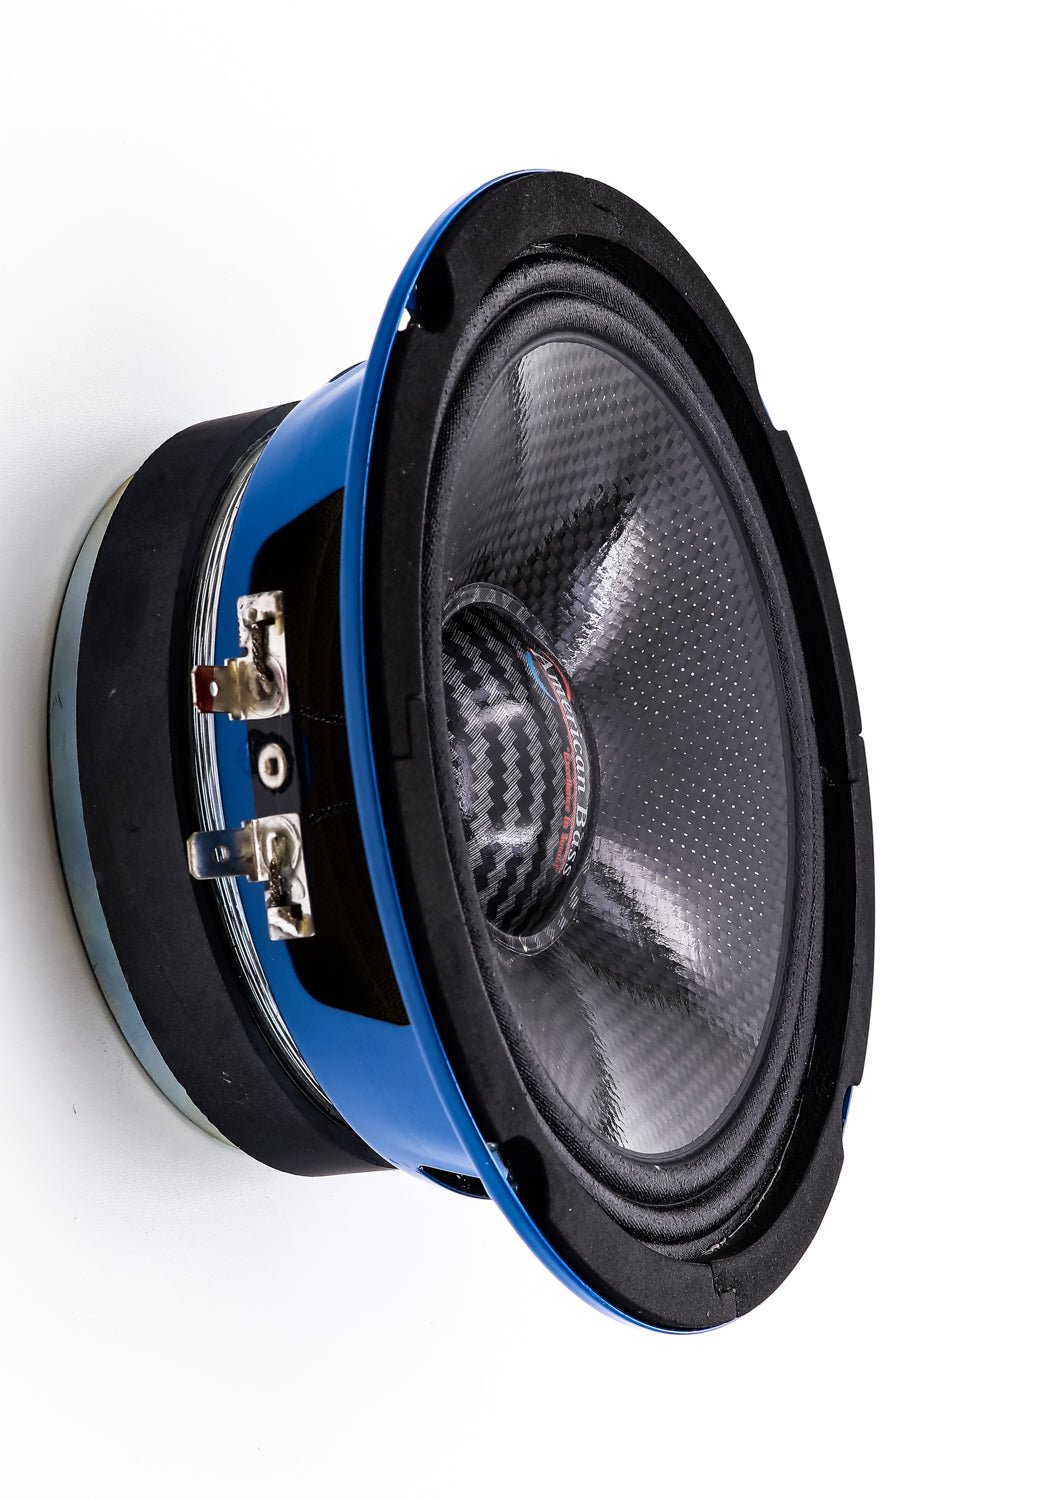 Godfather 6.5 Carbon Cone (Pair) - American Bass Audio